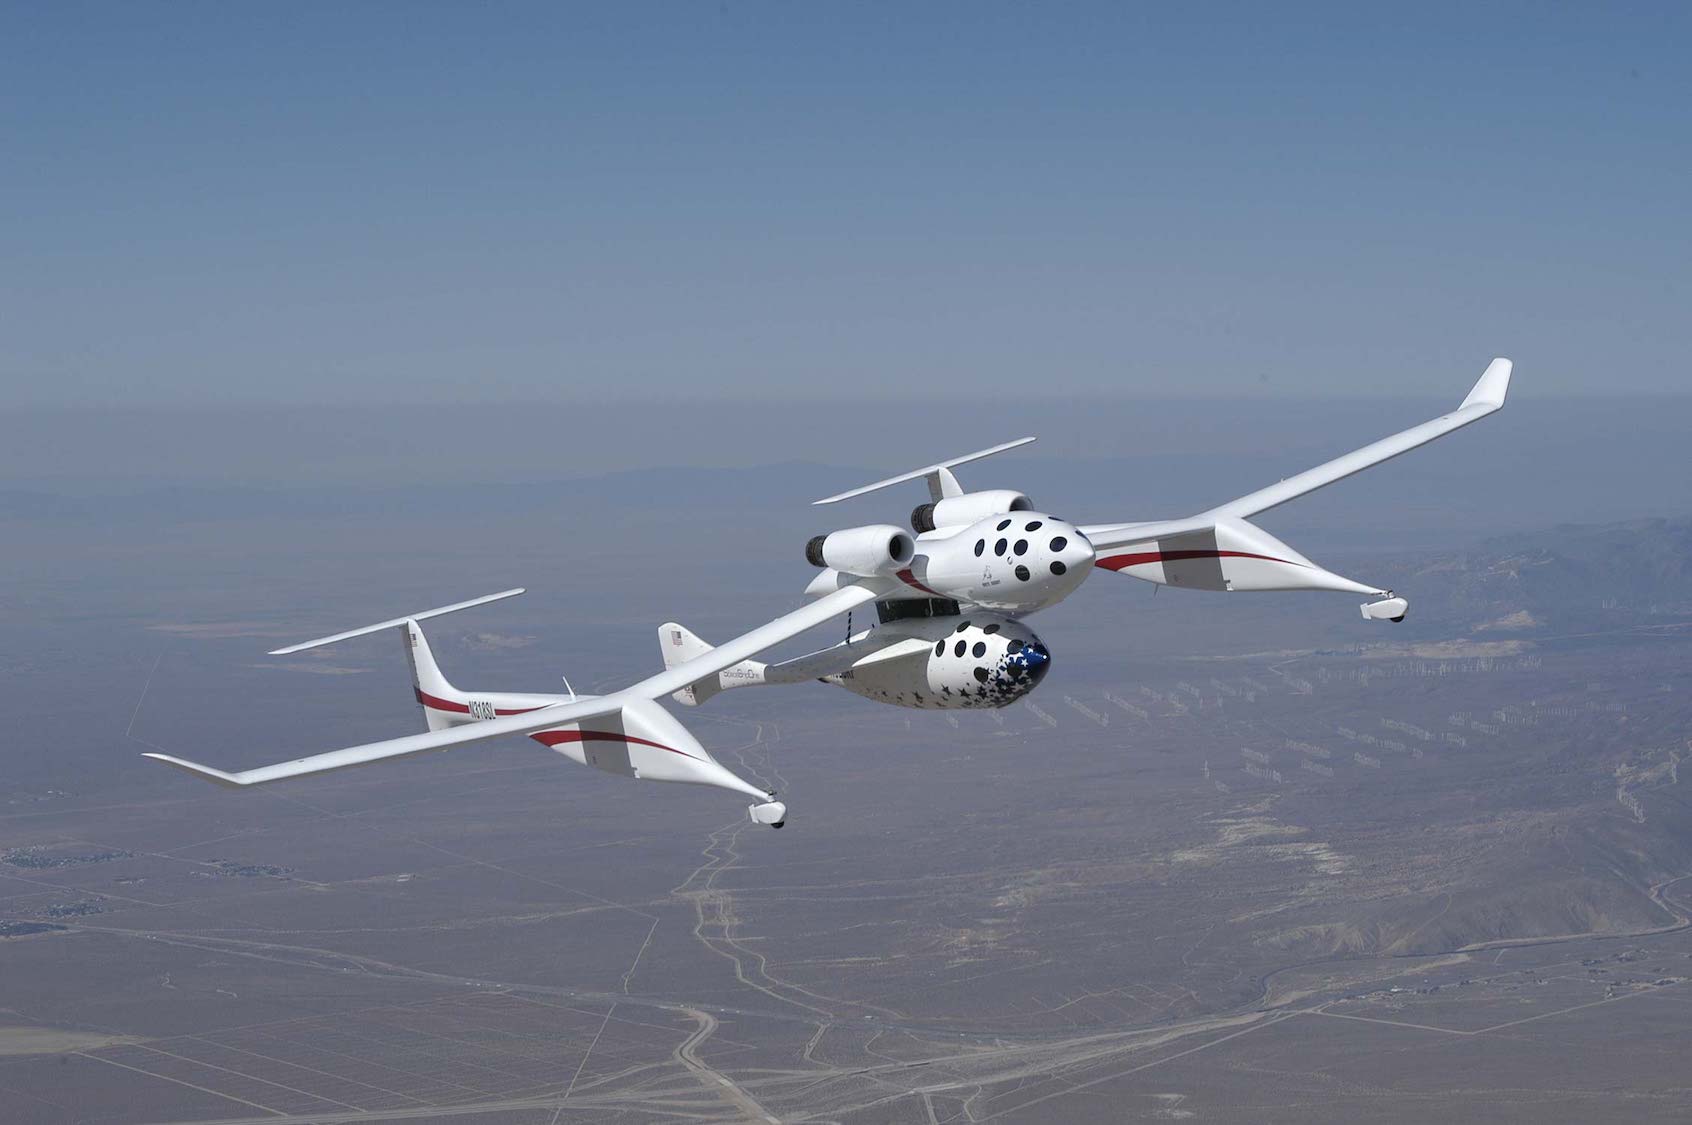 SpaceShipOne and WhiteKnightTwo captive carry flight.